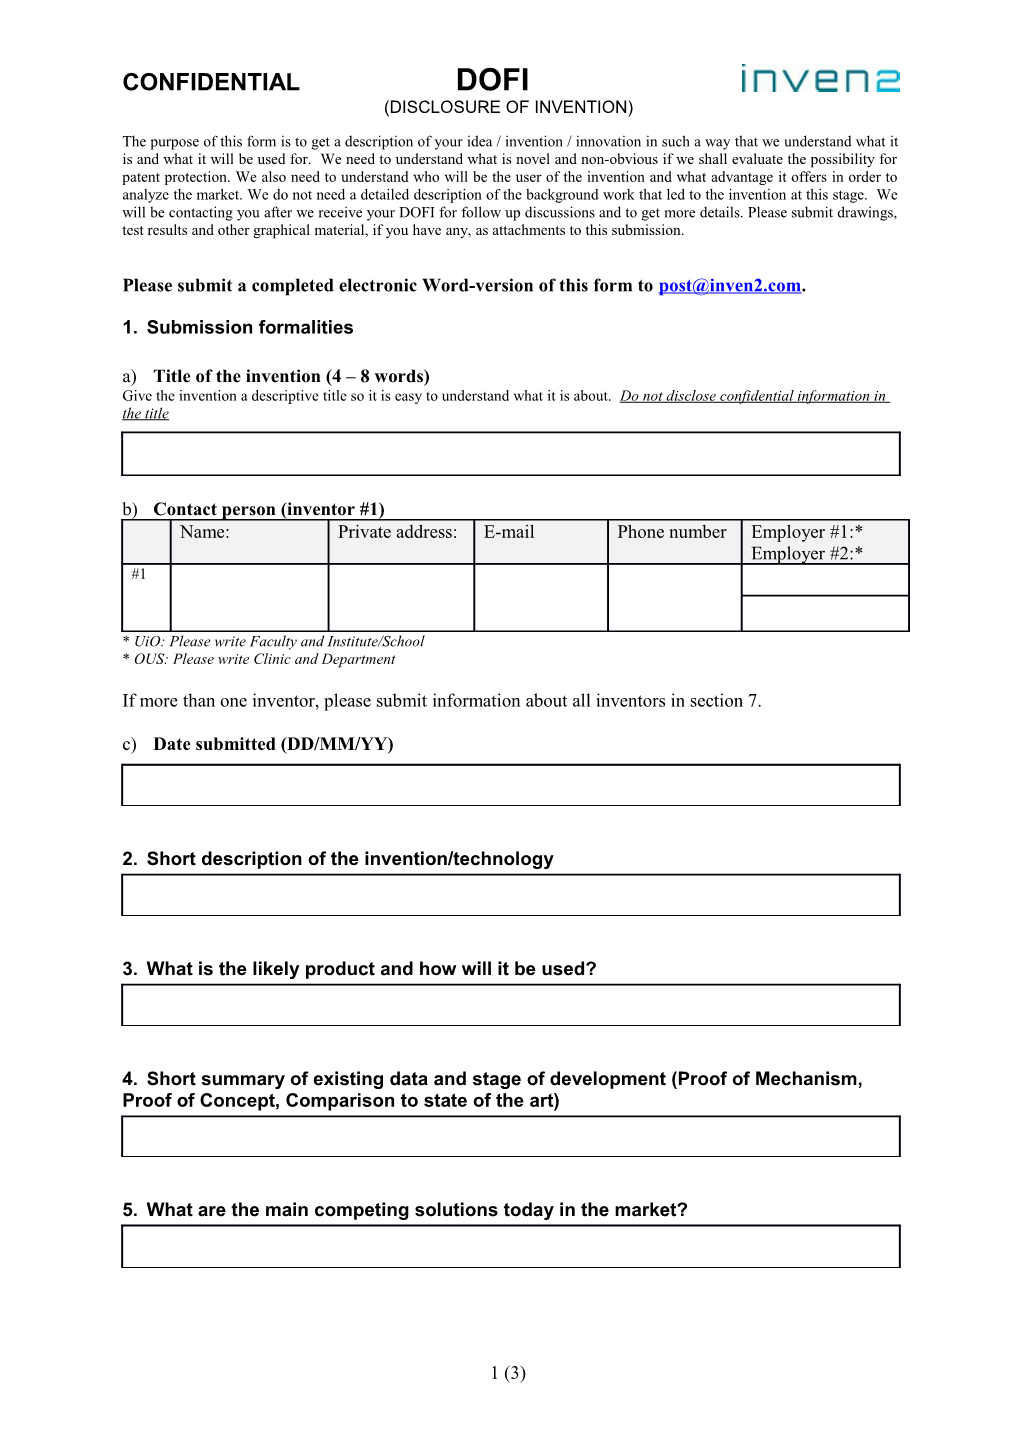 Please Submit a Completed Electronic Word-Version of This Form to